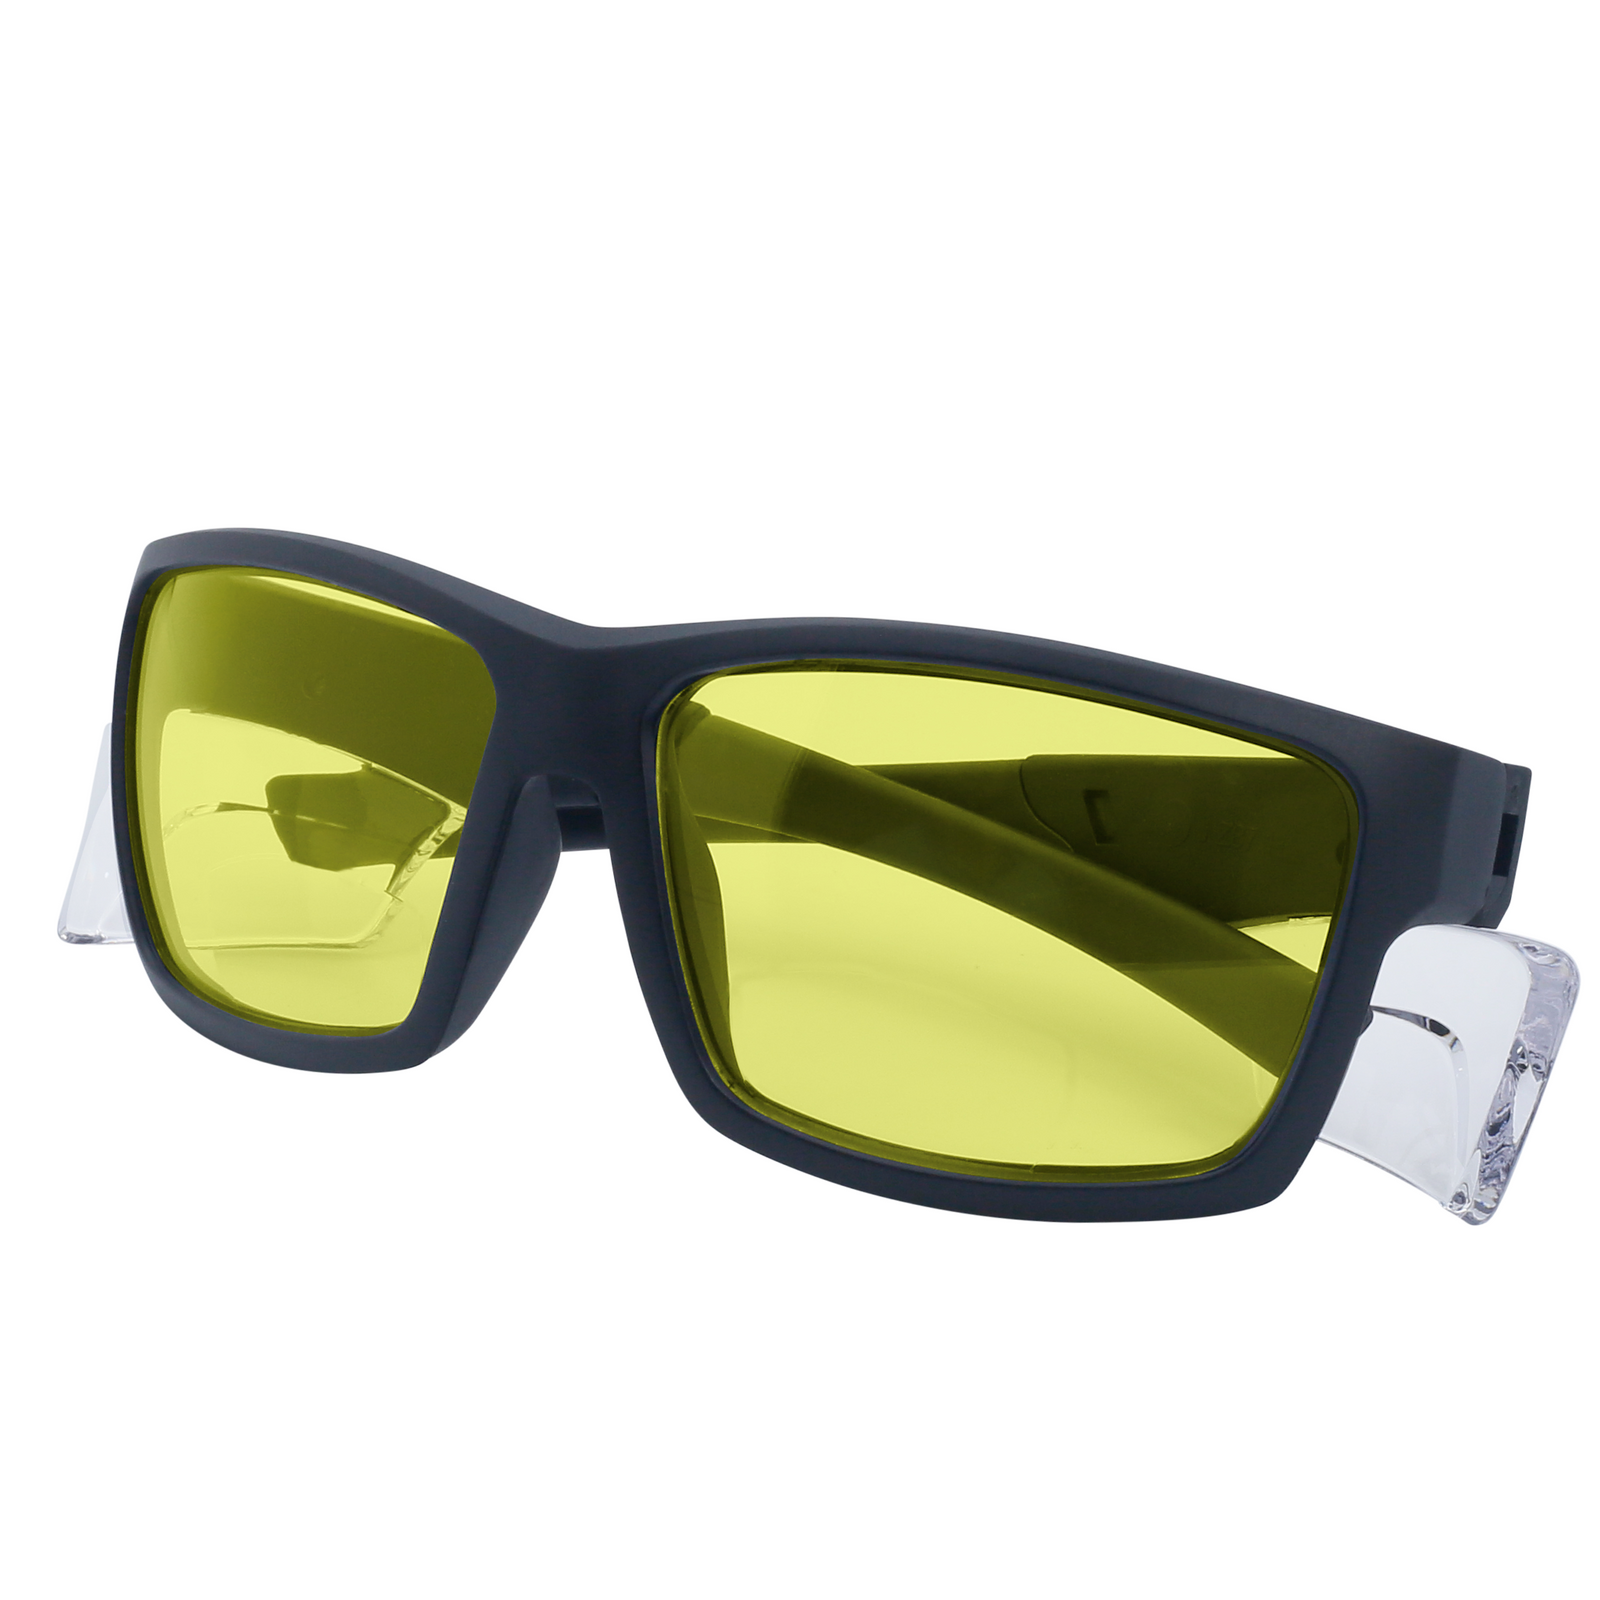 Image shows a diagonal view of a JORESTECH safety Glass with clear side shield for high impact protection with the temples closed. These safety glasses with clear side shields  are ANSI and have black frame and clear polycarbonate lenses. The background of the image is white